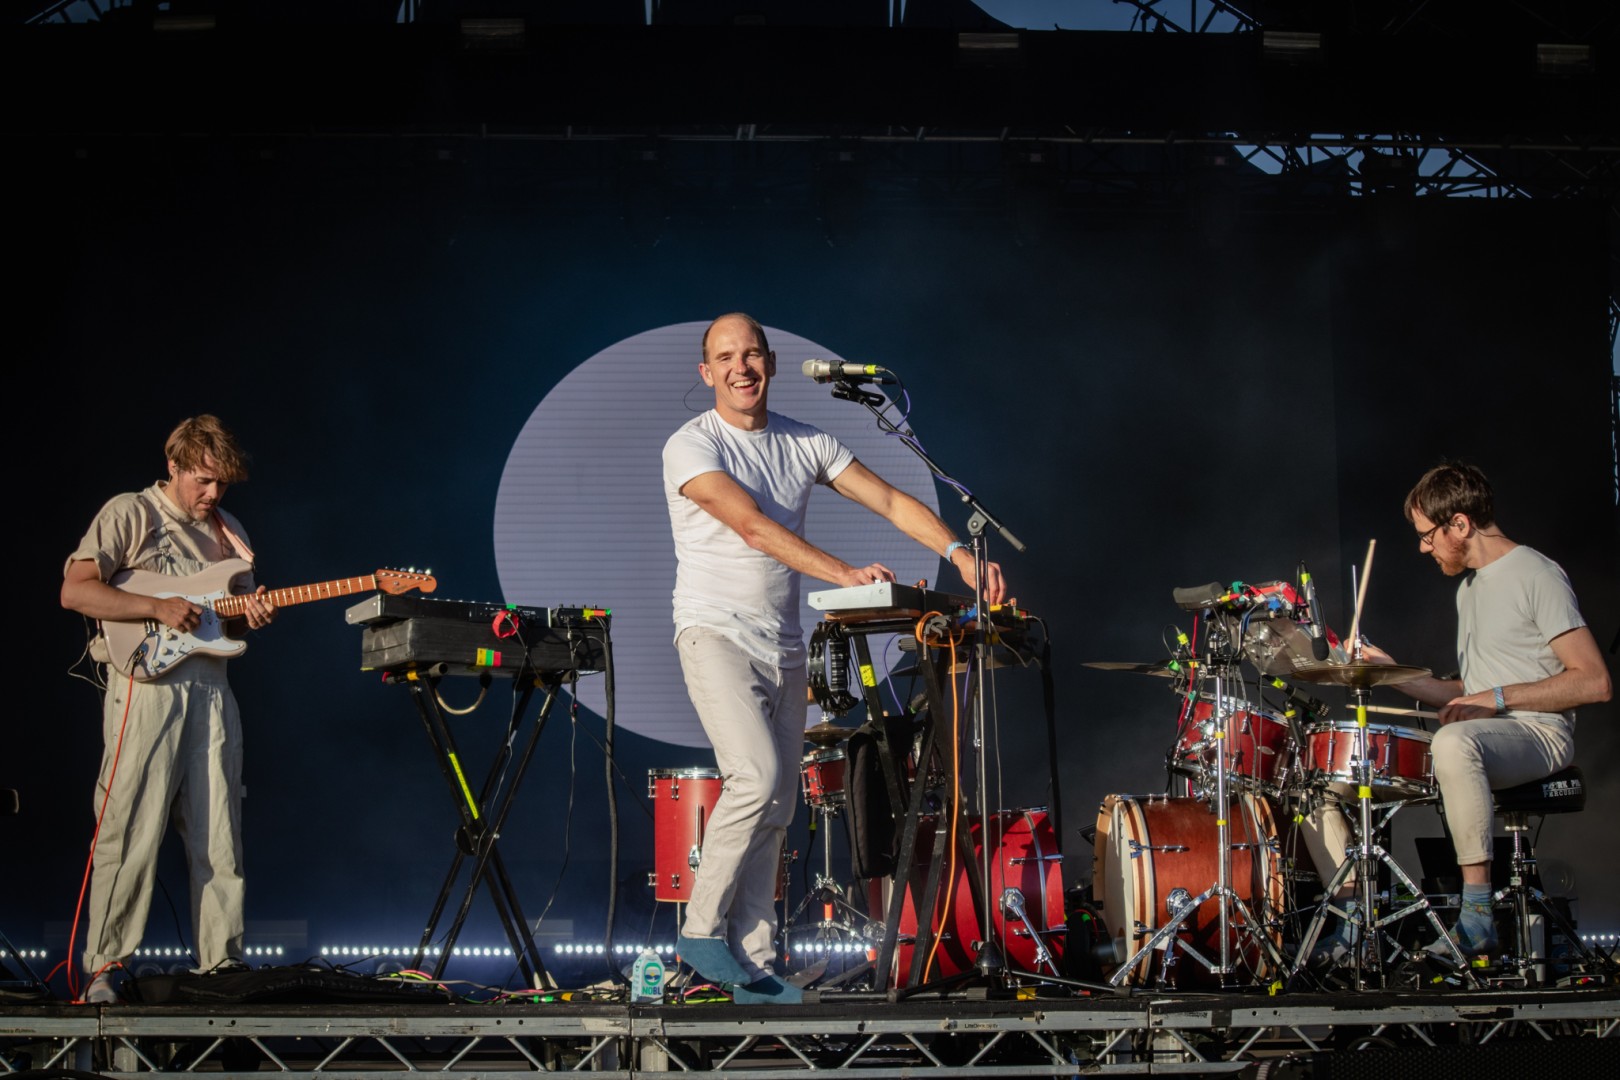 Caribou at Brockwell Park in London on May 27, 2022 (e3d3726275)